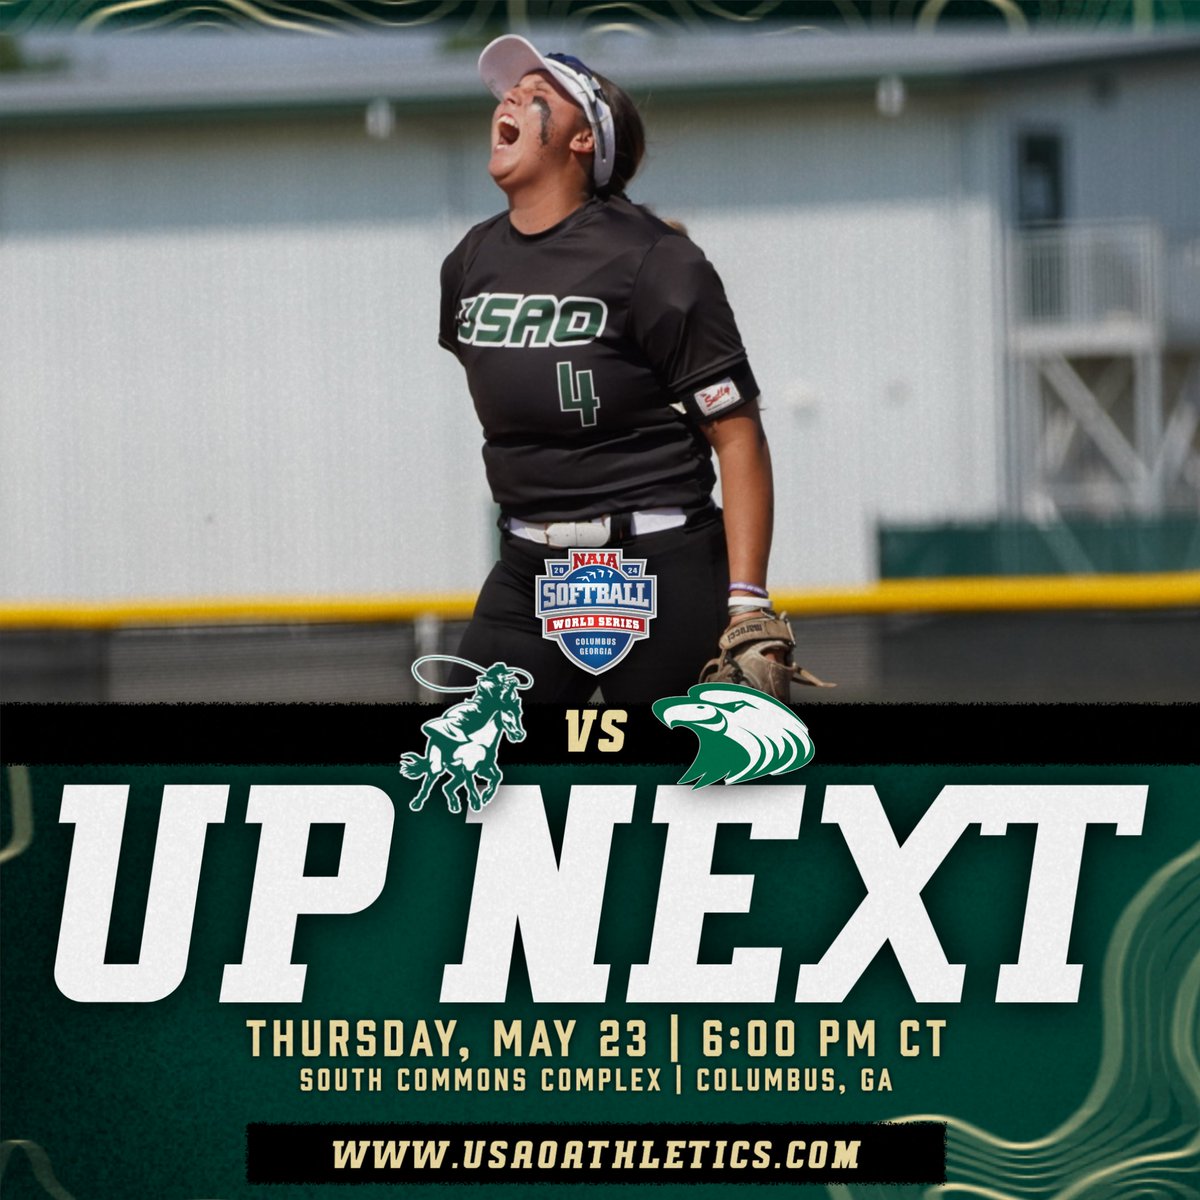 𝘜𝘗 𝘕𝘌𝘟𝘛⏩ 𝙉𝘼𝙄𝘼 𝙒𝙤𝙧𝙡𝙙 𝙎𝙚𝙧𝙞𝙚𝙨🏆 🆚: #3 Central Methodist 📅: May 23 ⏰: 6:00 PM CT 📍: Columbus, GA 🏟️: South Commons Complex 📺📊🎟️: usaoathletics.com/composite #DroverNation🐎 x #BleedGreen